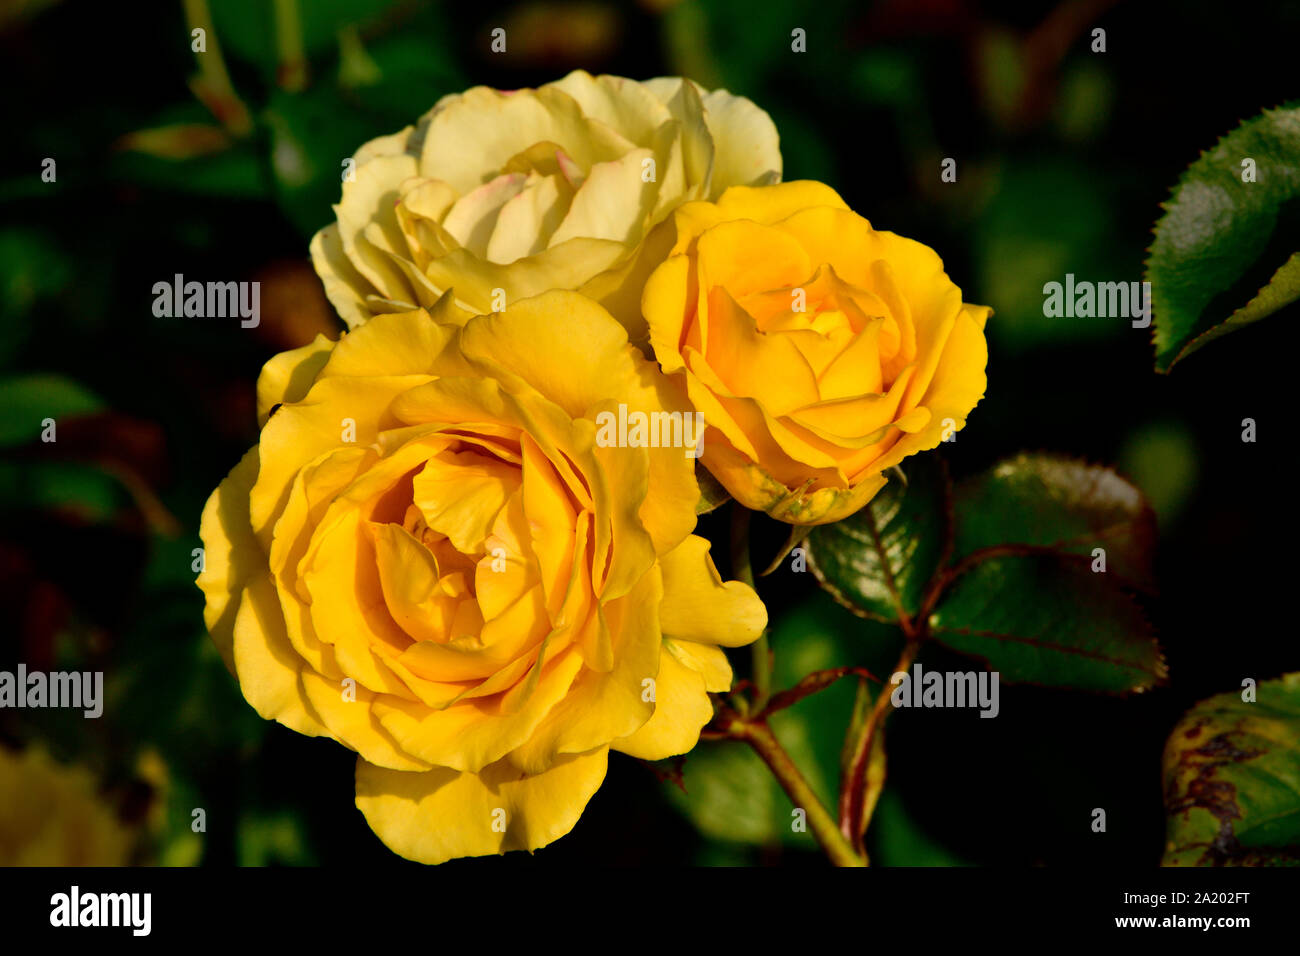 A cluster of three yellow roses growing together in a rose garden Stock Photo